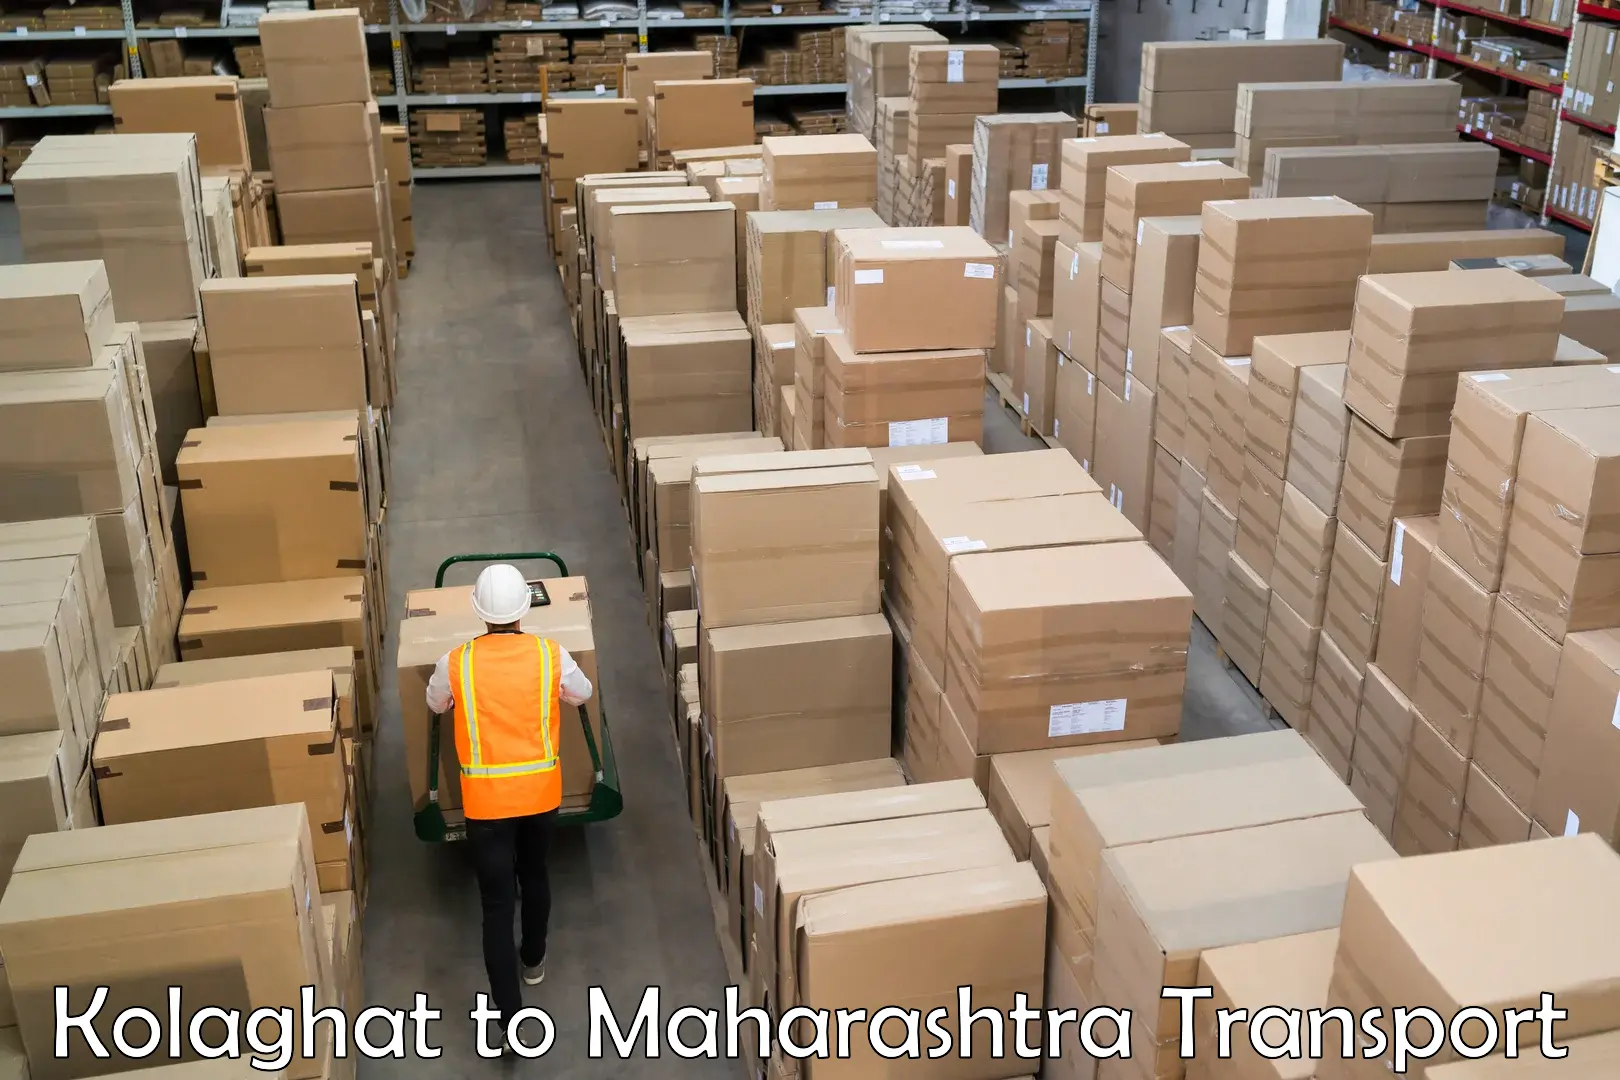 Truck transport companies in India Kolaghat to Omerga